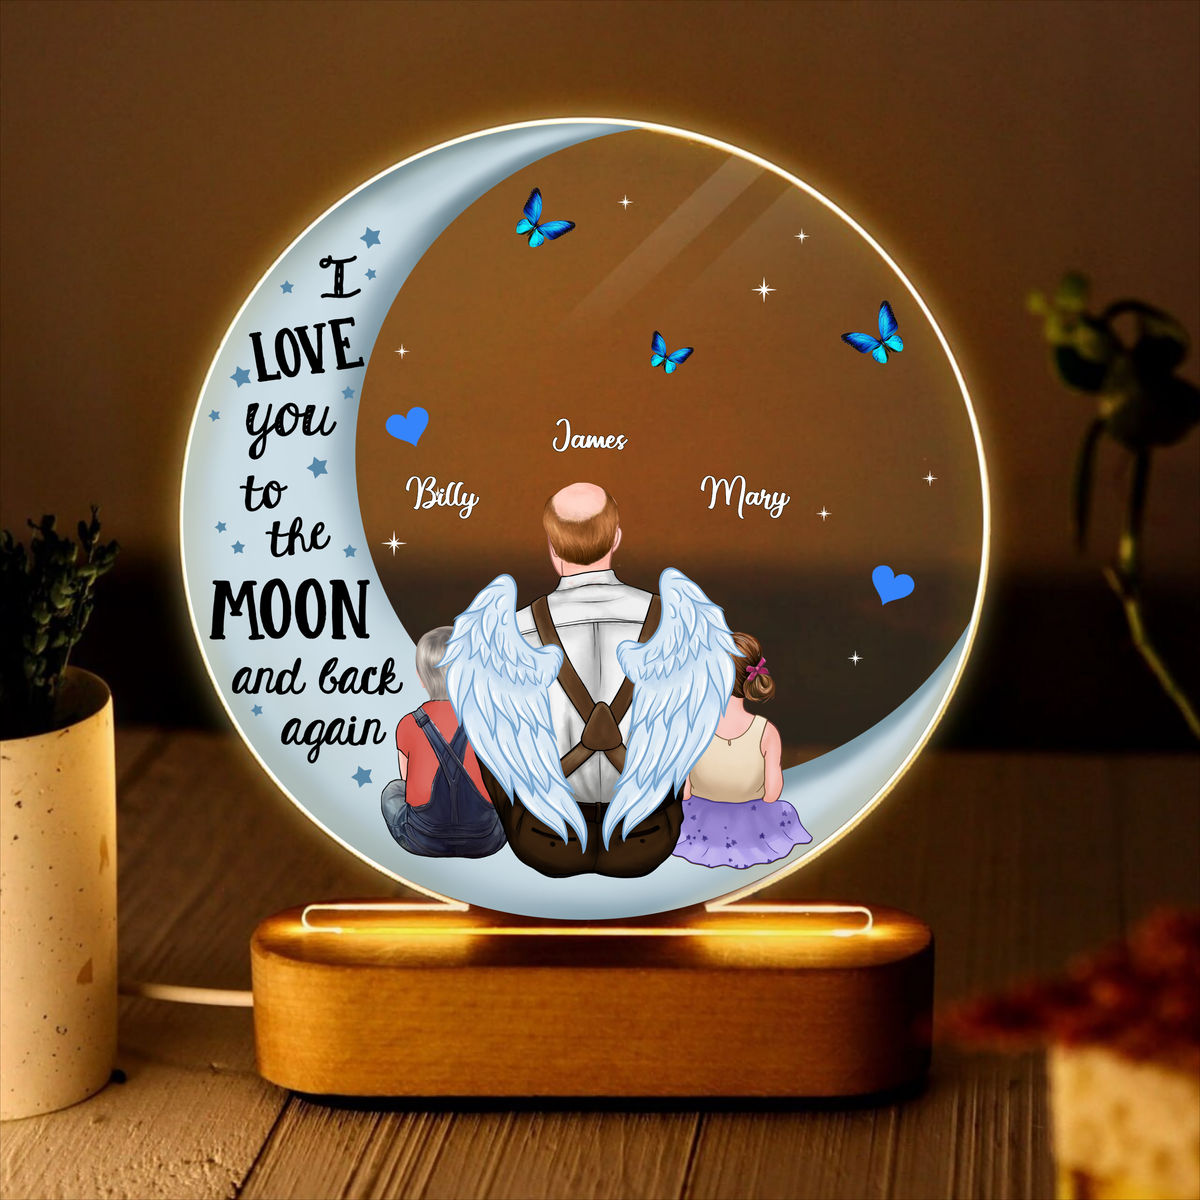 Personalized Circle Plaque LED Night Light - I love you to the moon and back again_1